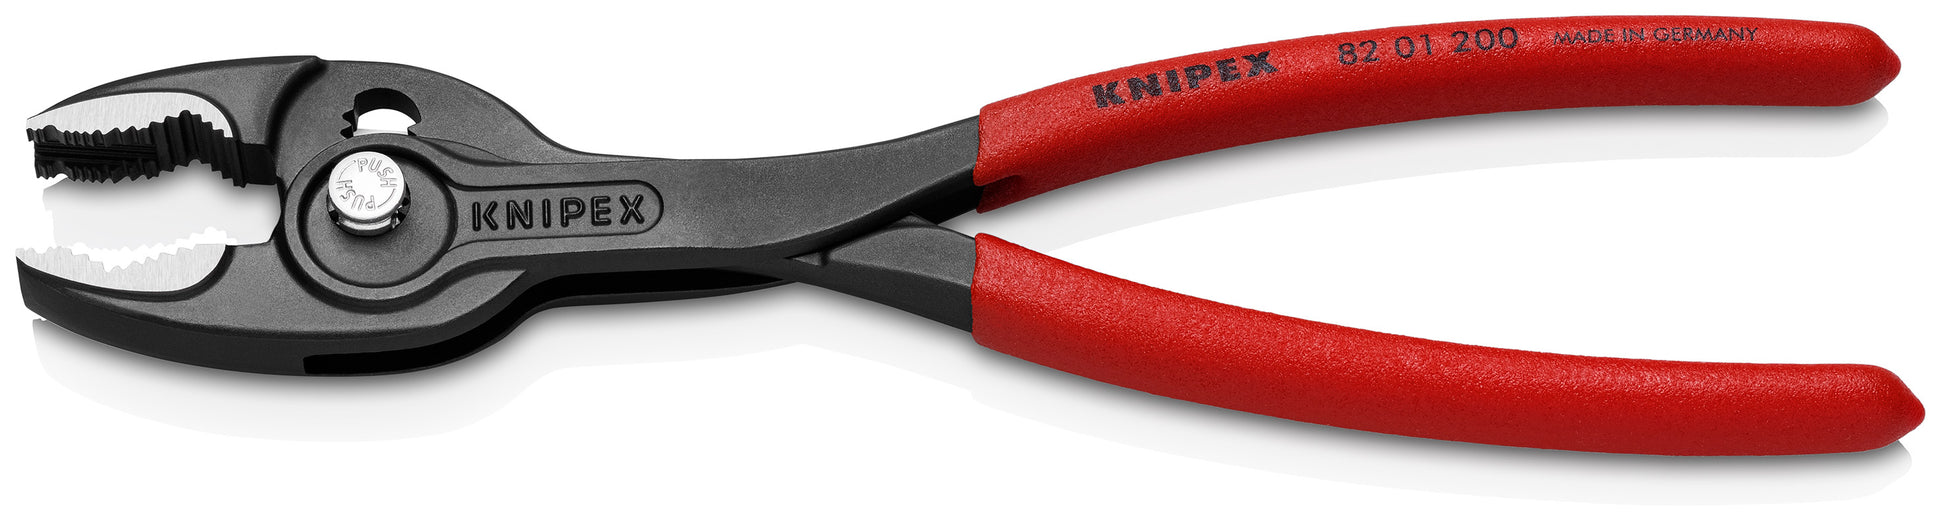 KNIPEX - Pliers Wrench, Chrome (86 03 180) - Slip Joint Pliers 